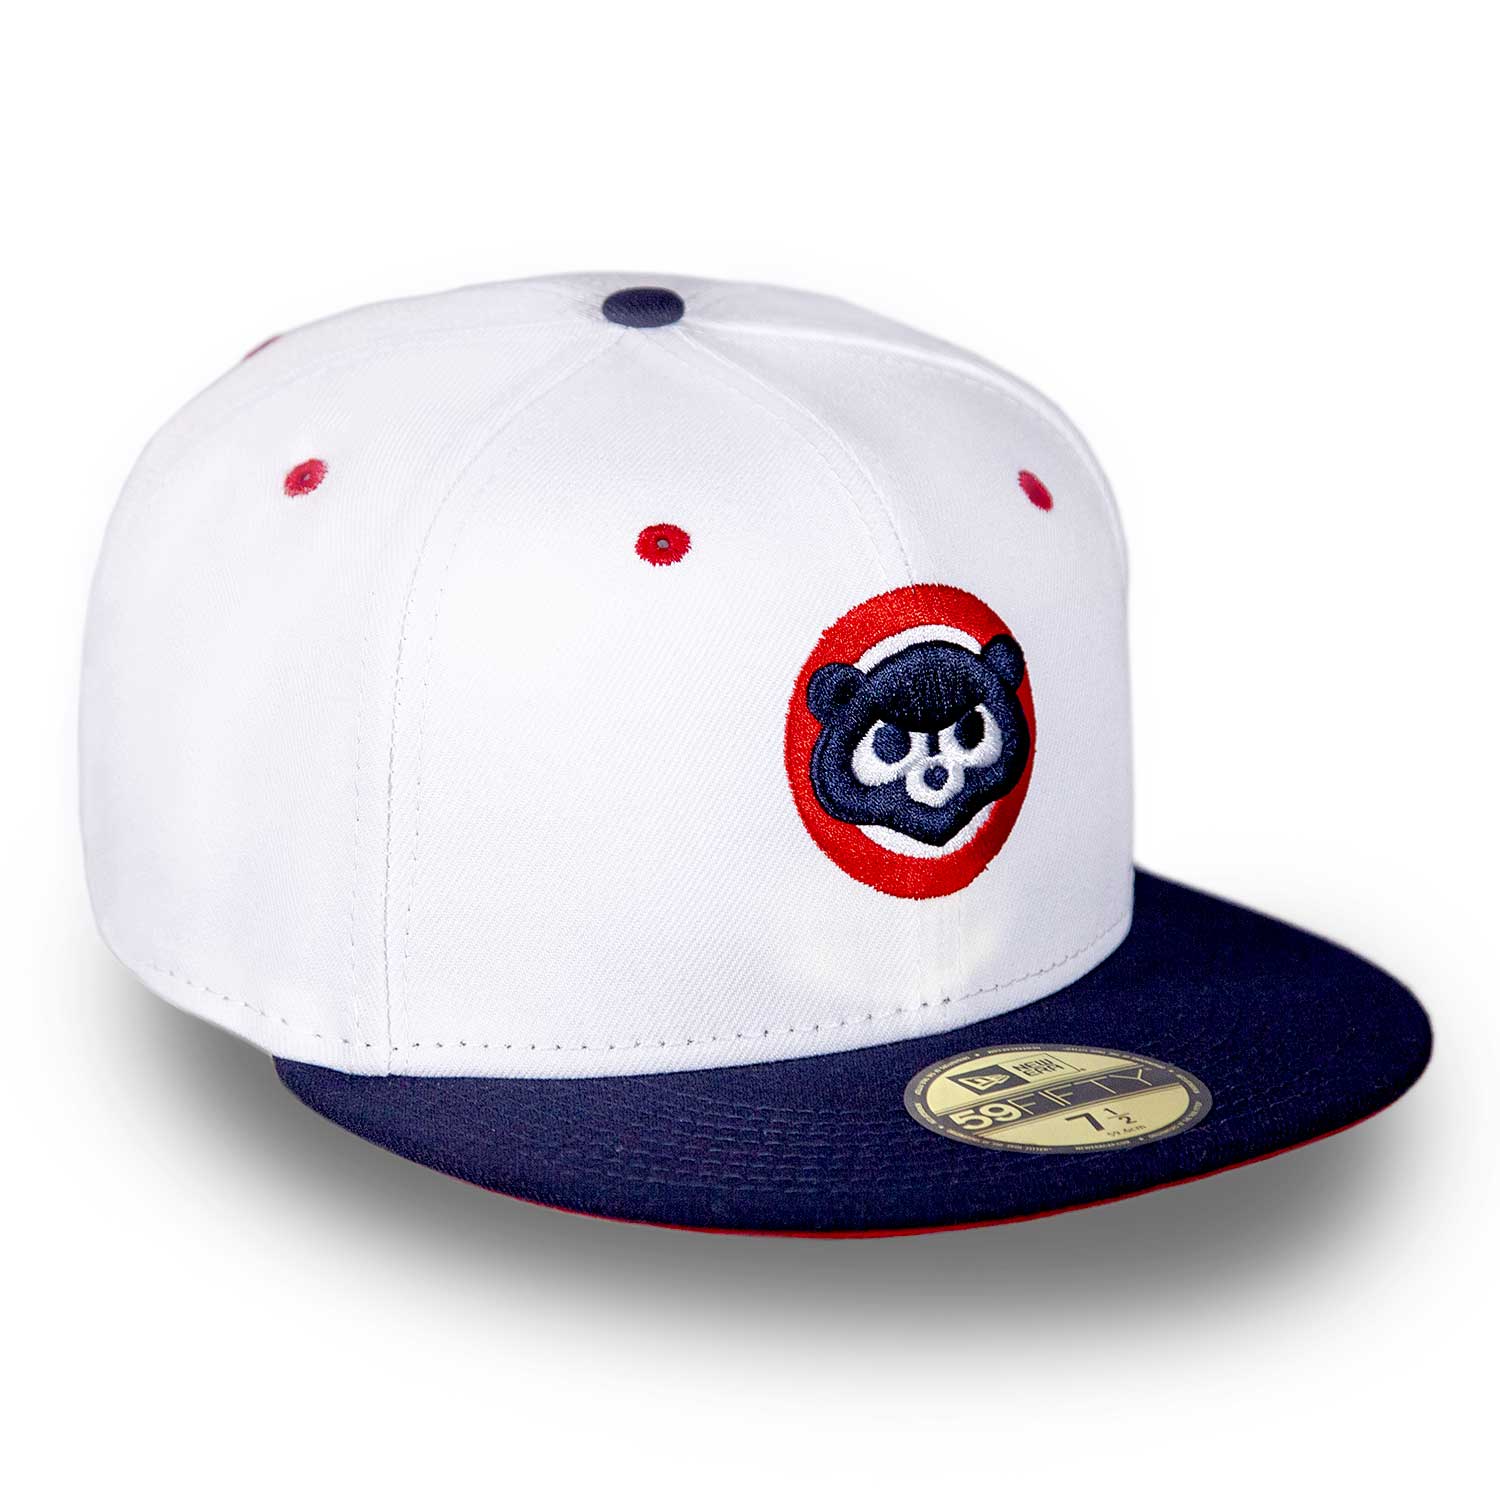 New Era Chicago Cubs Light Blue Silver Edition 59Fifty Fitted Hat